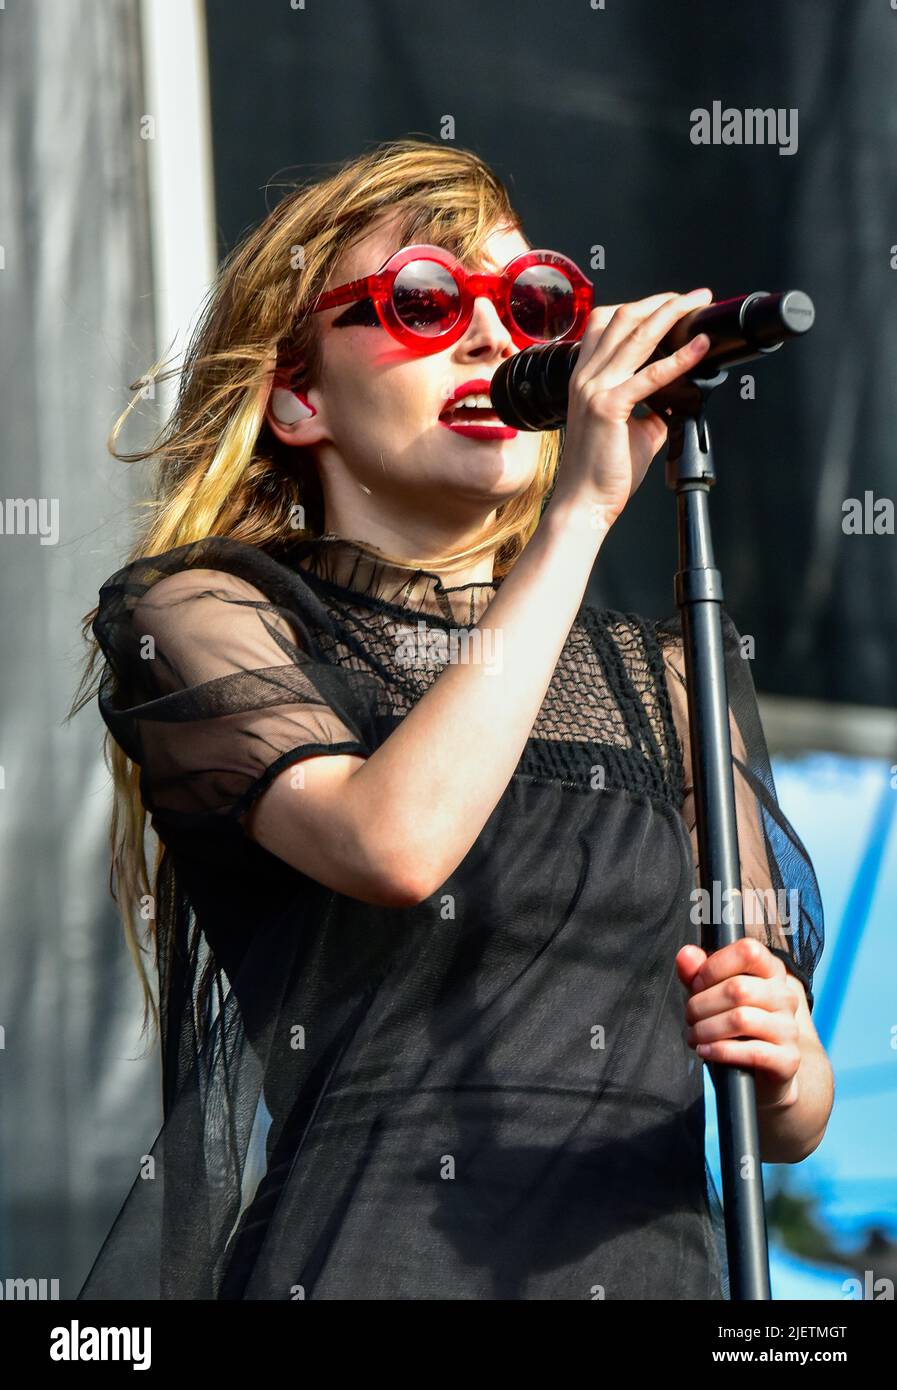 Napa Valley, California, May 27, 2022 - CHVRCHES Lauren Mayberry on stage at the 2022 BottleRock Festival in Napa California, Credit: Ken Howard/Alamy Stock Photo